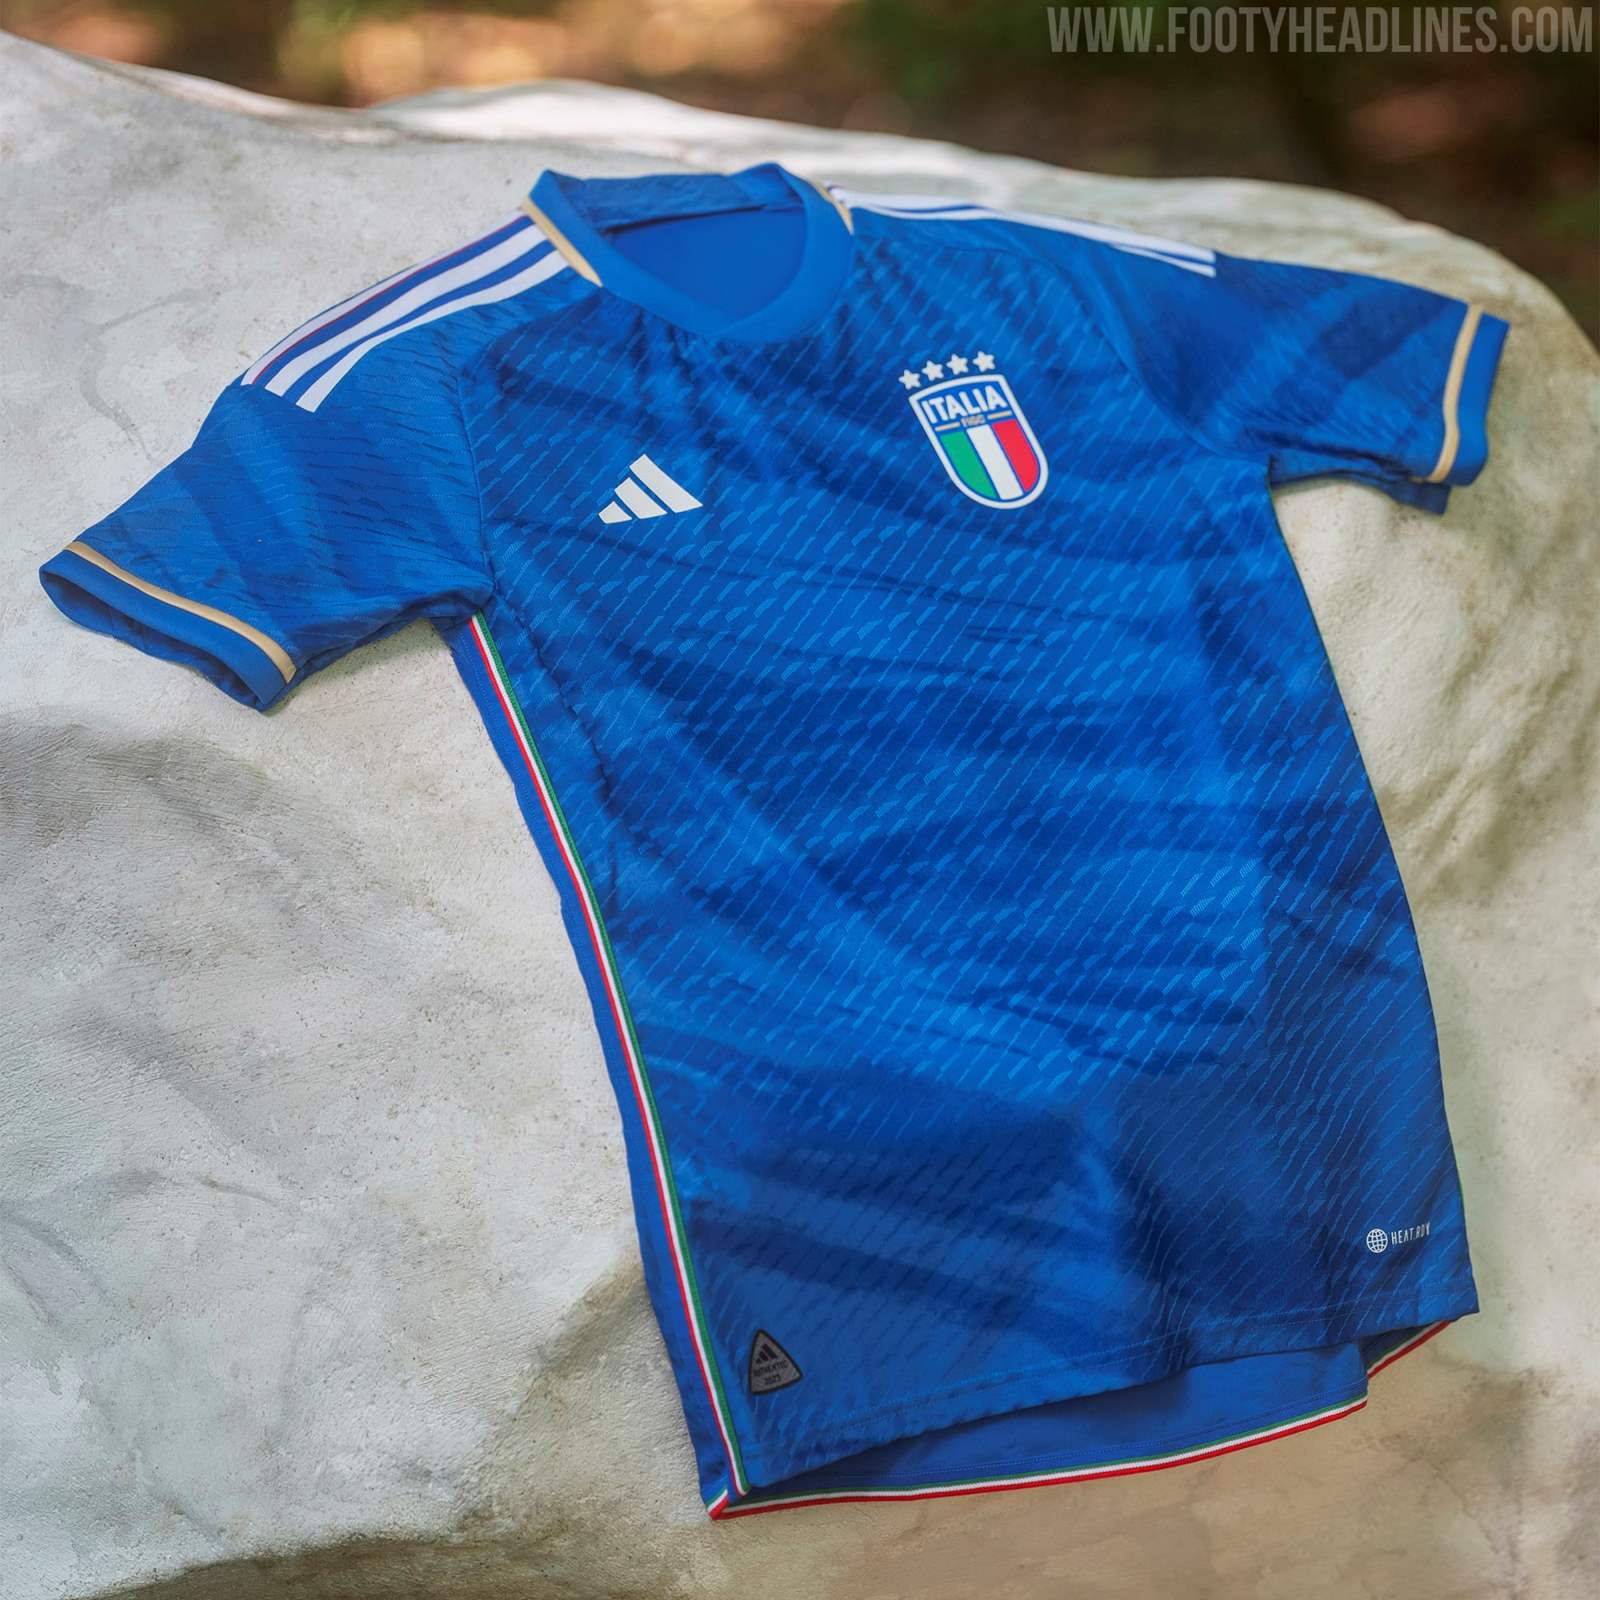 The new 2023 Italy away shirt is a marbled work of art